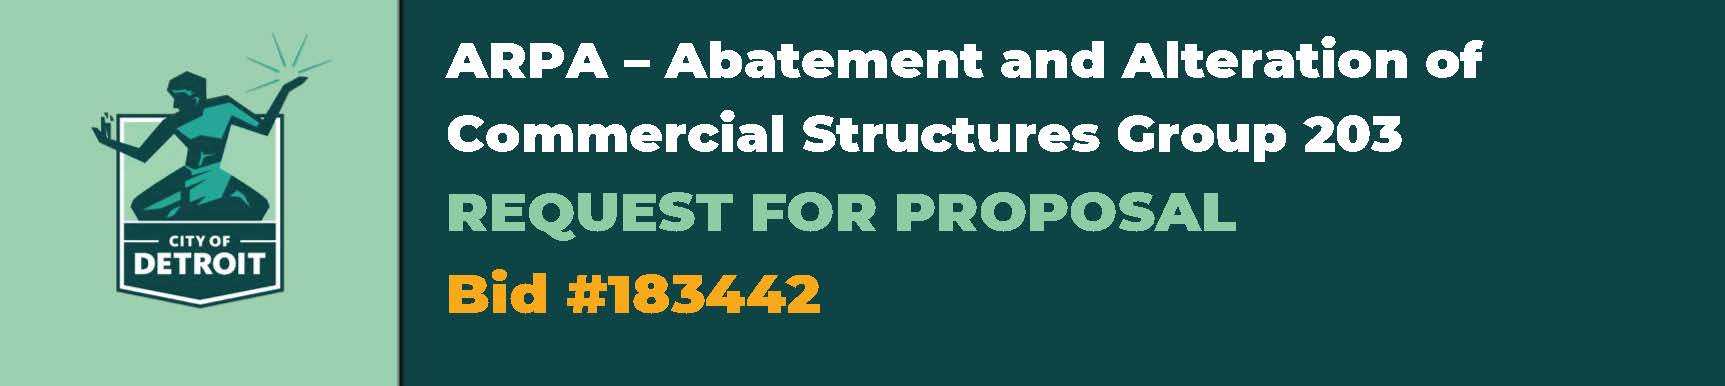 ARPA – Abatement and Alteration of Commercial Structures Group 203